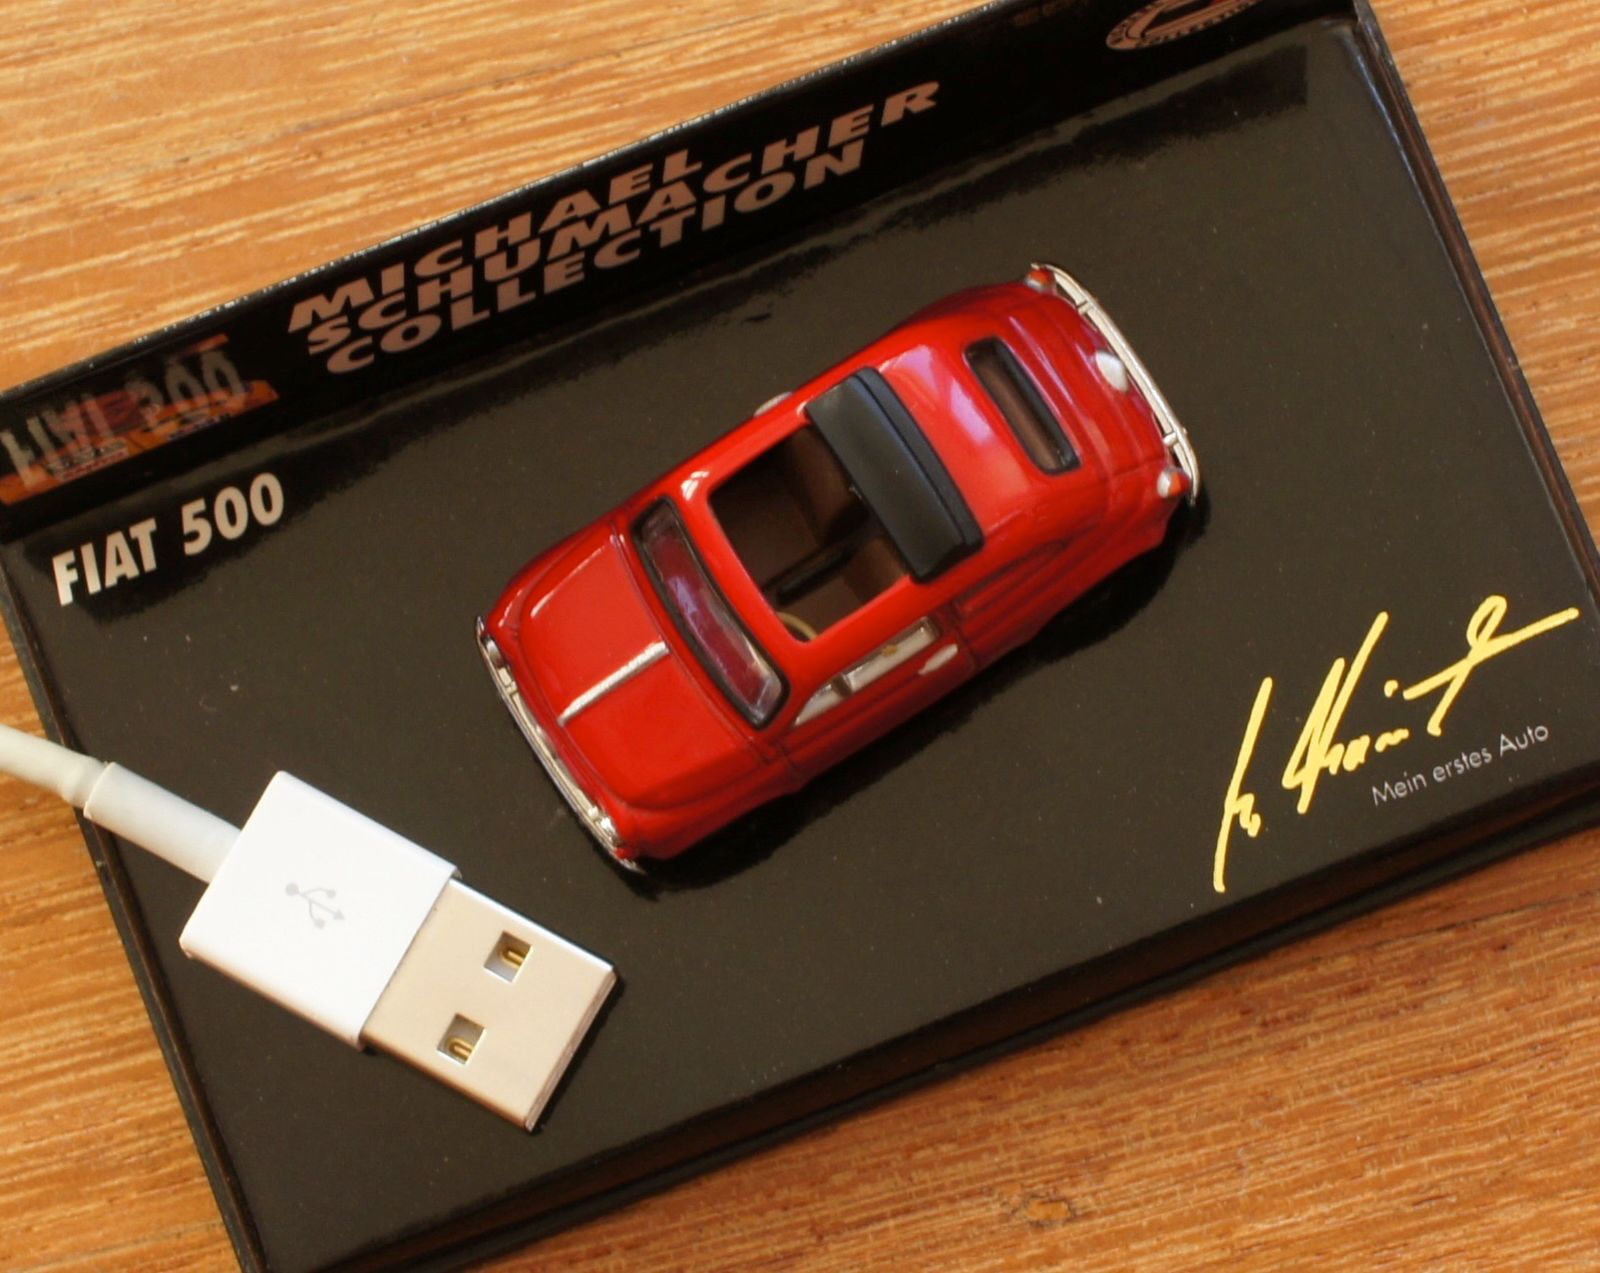 USB for the size of it!